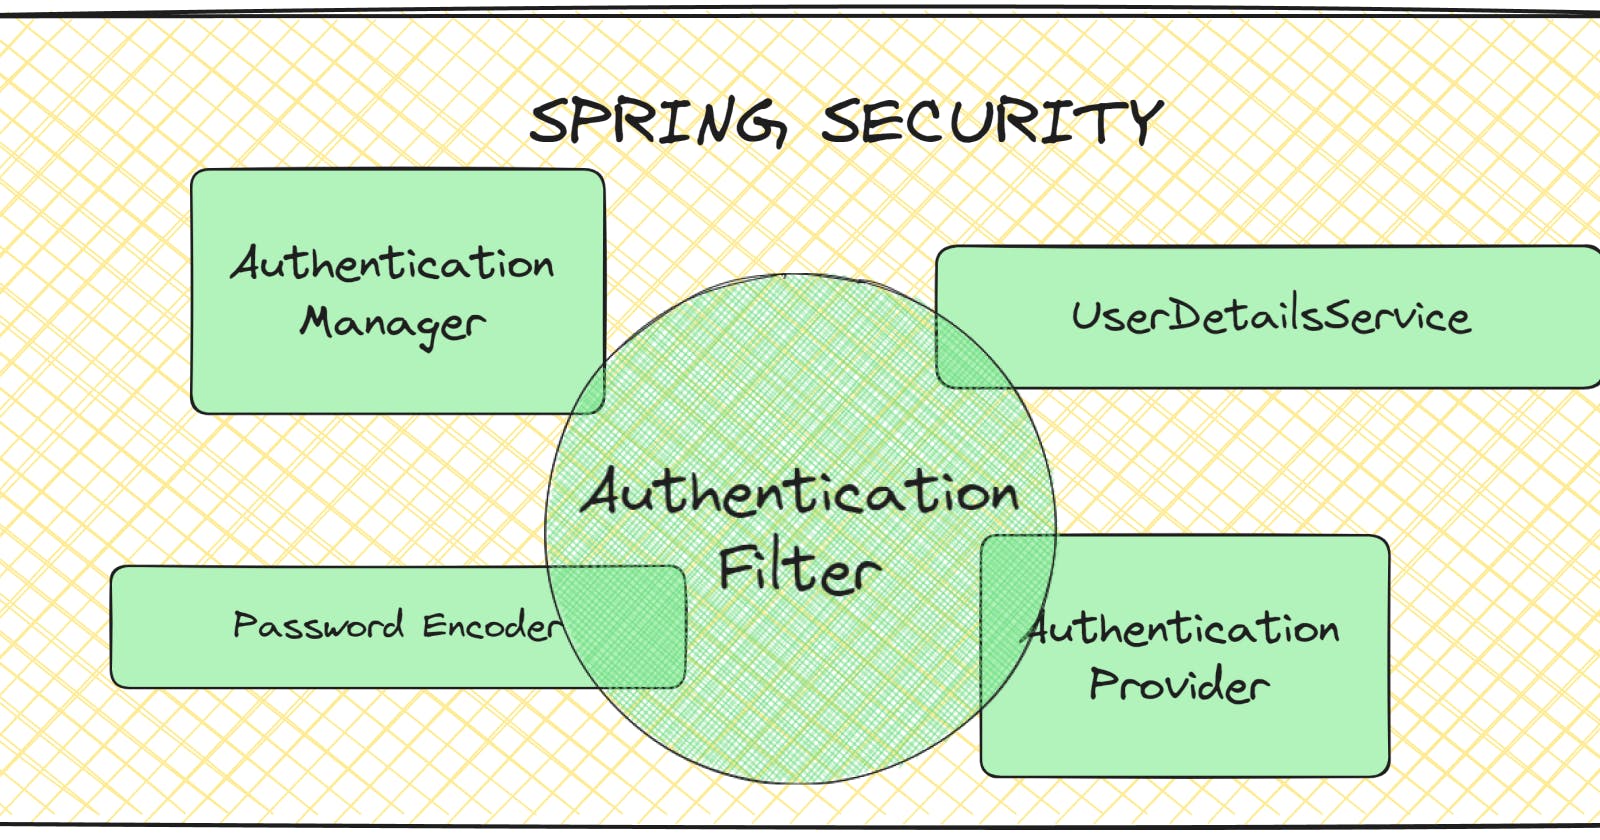 Dive into the Spring Security Architecture